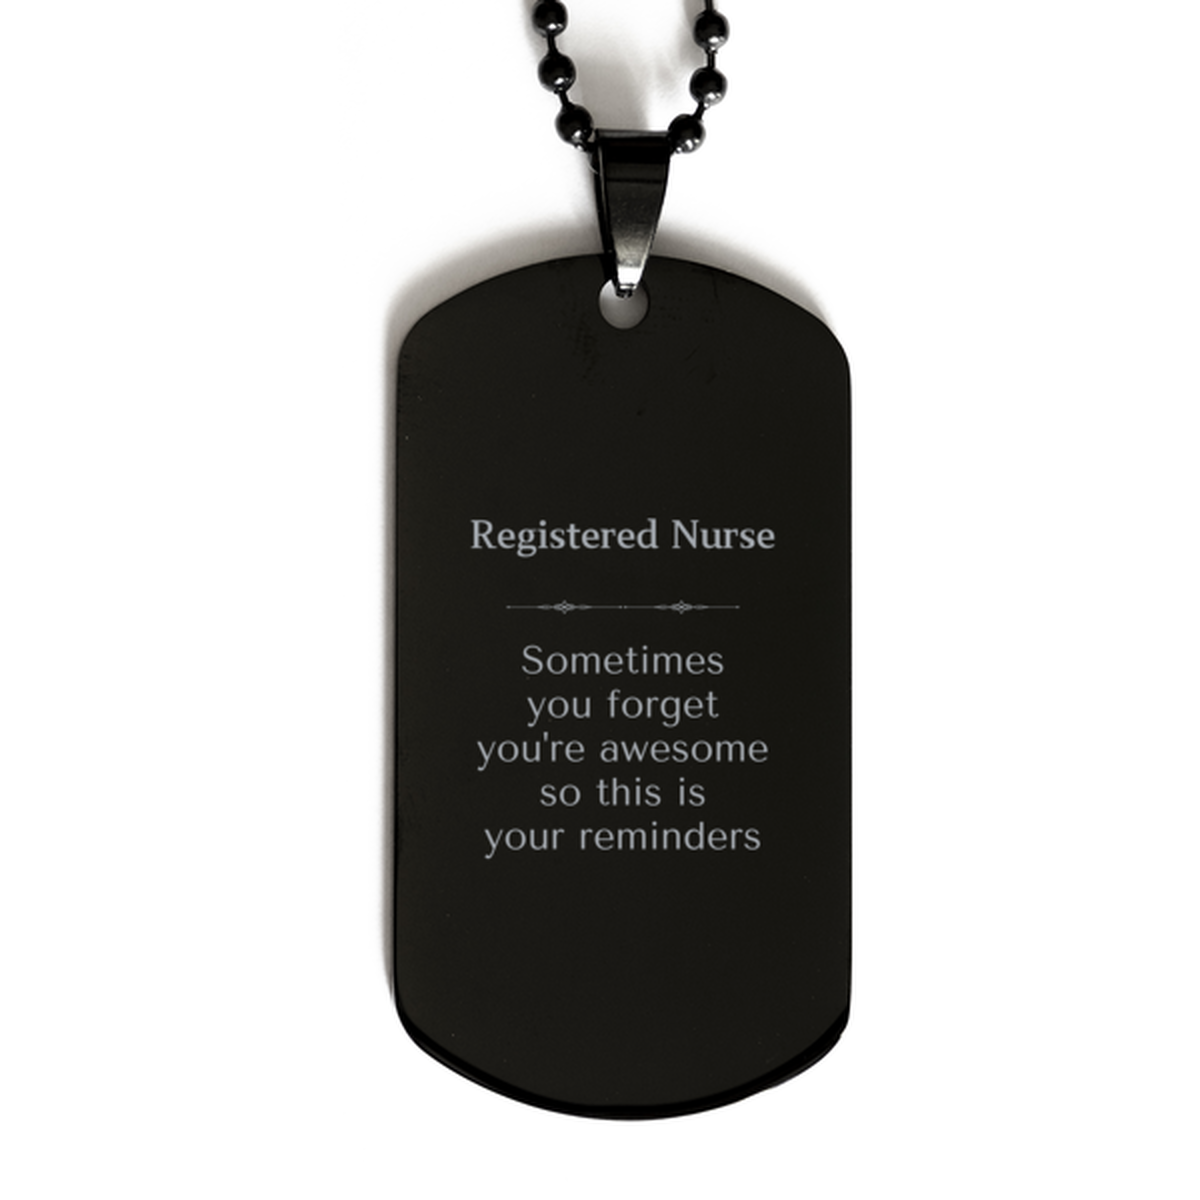 Sentimental Registered Nurse Black Dog Tag, Registered Nurse Sometimes you forget you're awesome so this is your reminders, Graduation Christmas Birthday Gifts for Registered Nurse, Men, Women, Coworkers